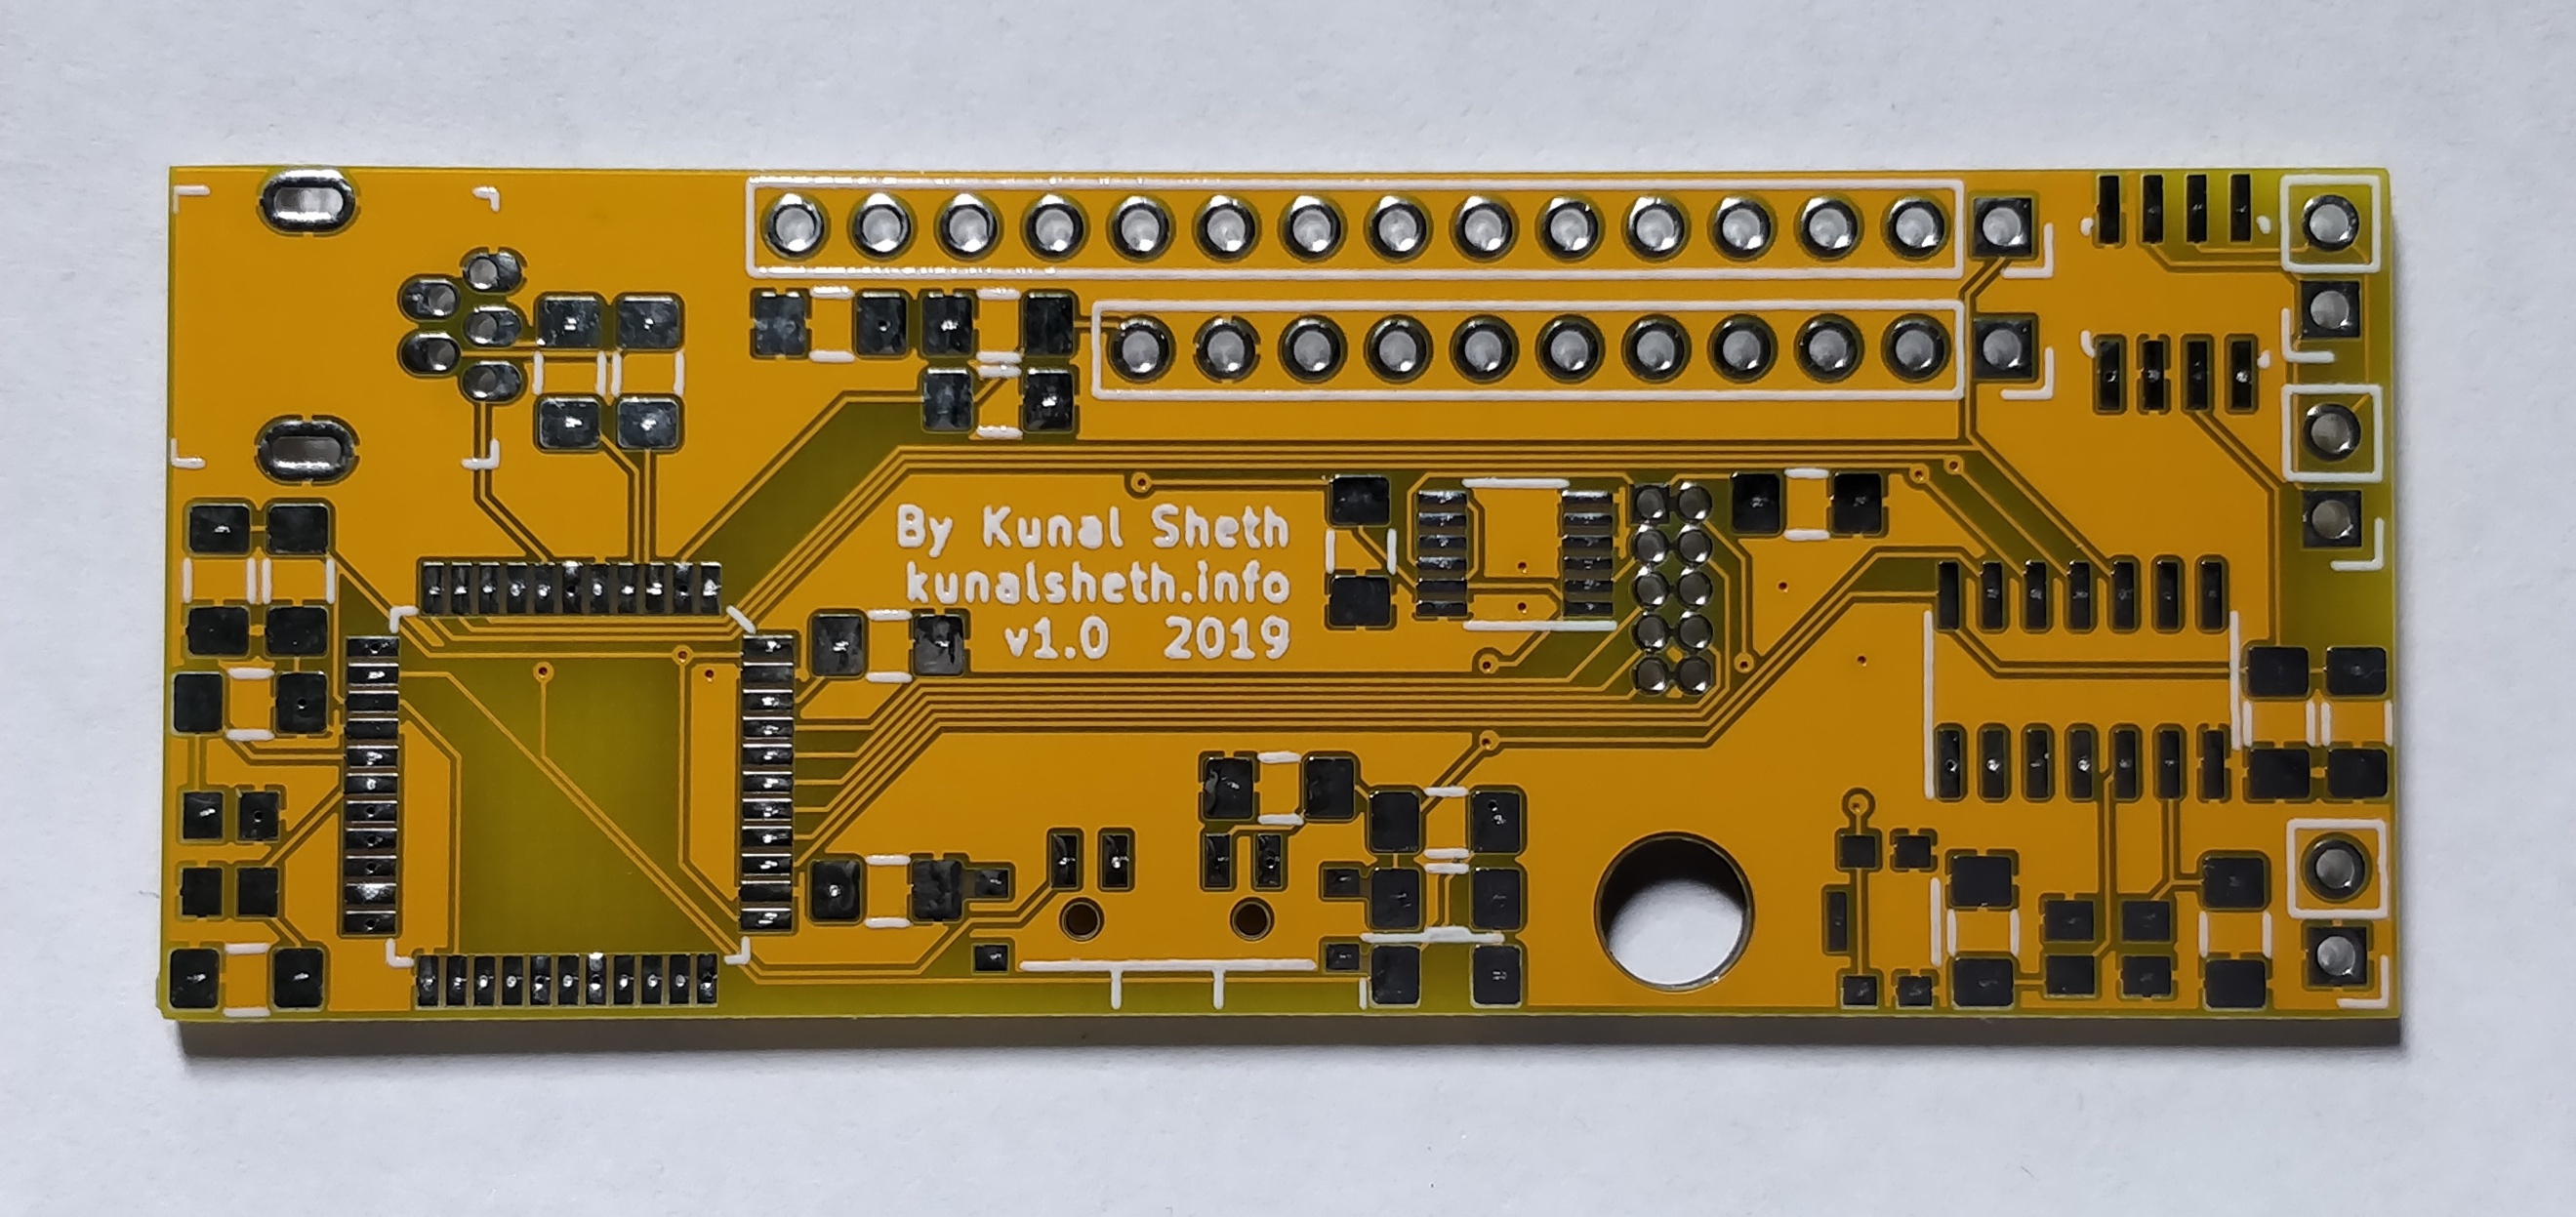 After designing my PCB in KiCad, I got it manufactured.